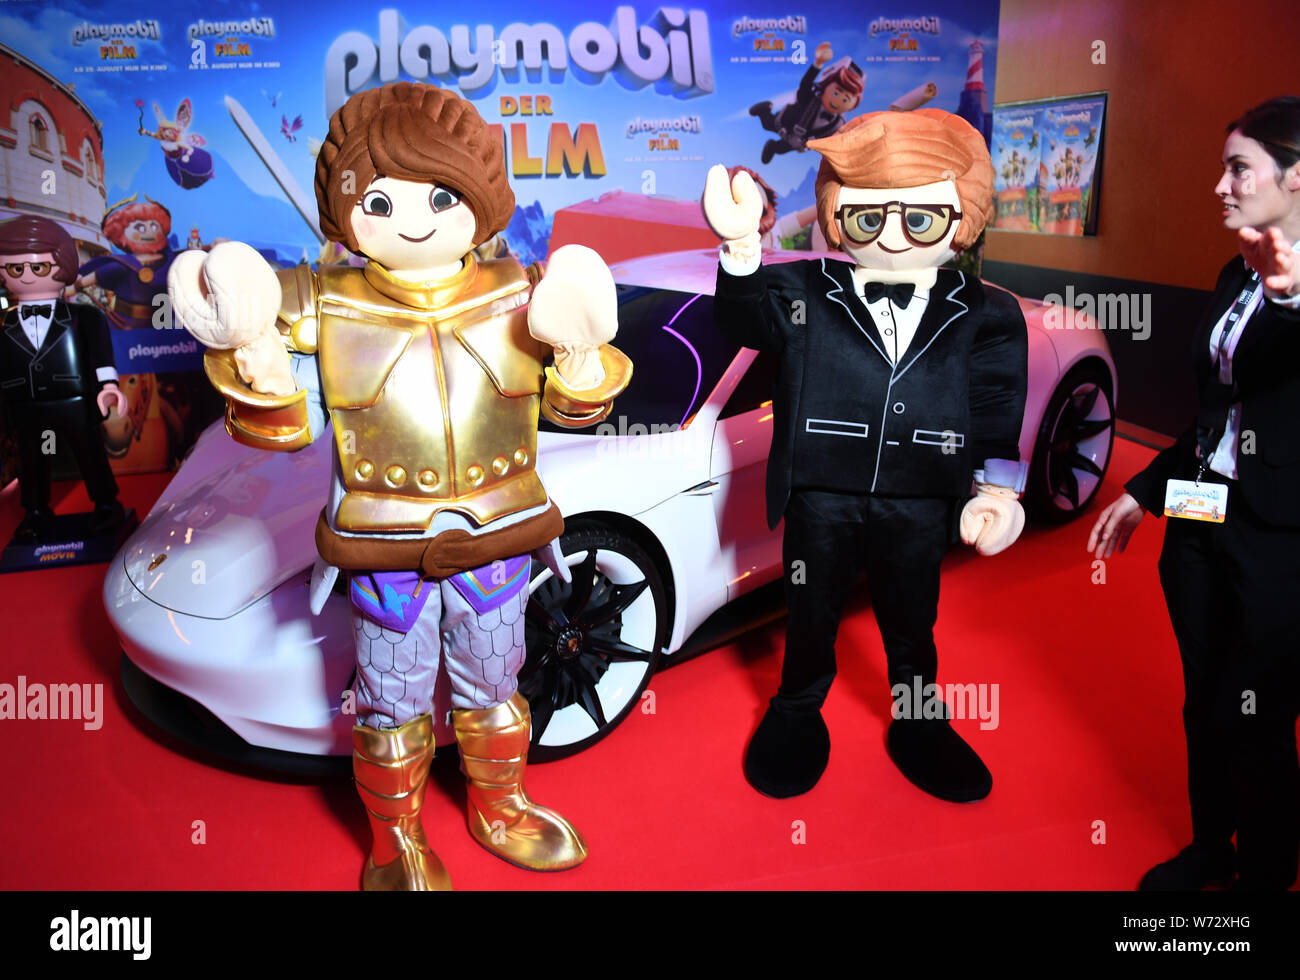 Munich, Germany. 04th Aug, 2019. Living Playmobil characters stand in front  of a Porsche at the film premiere "Playmobil - the film" on the red carpet  in the Mathäser cinema. The animated